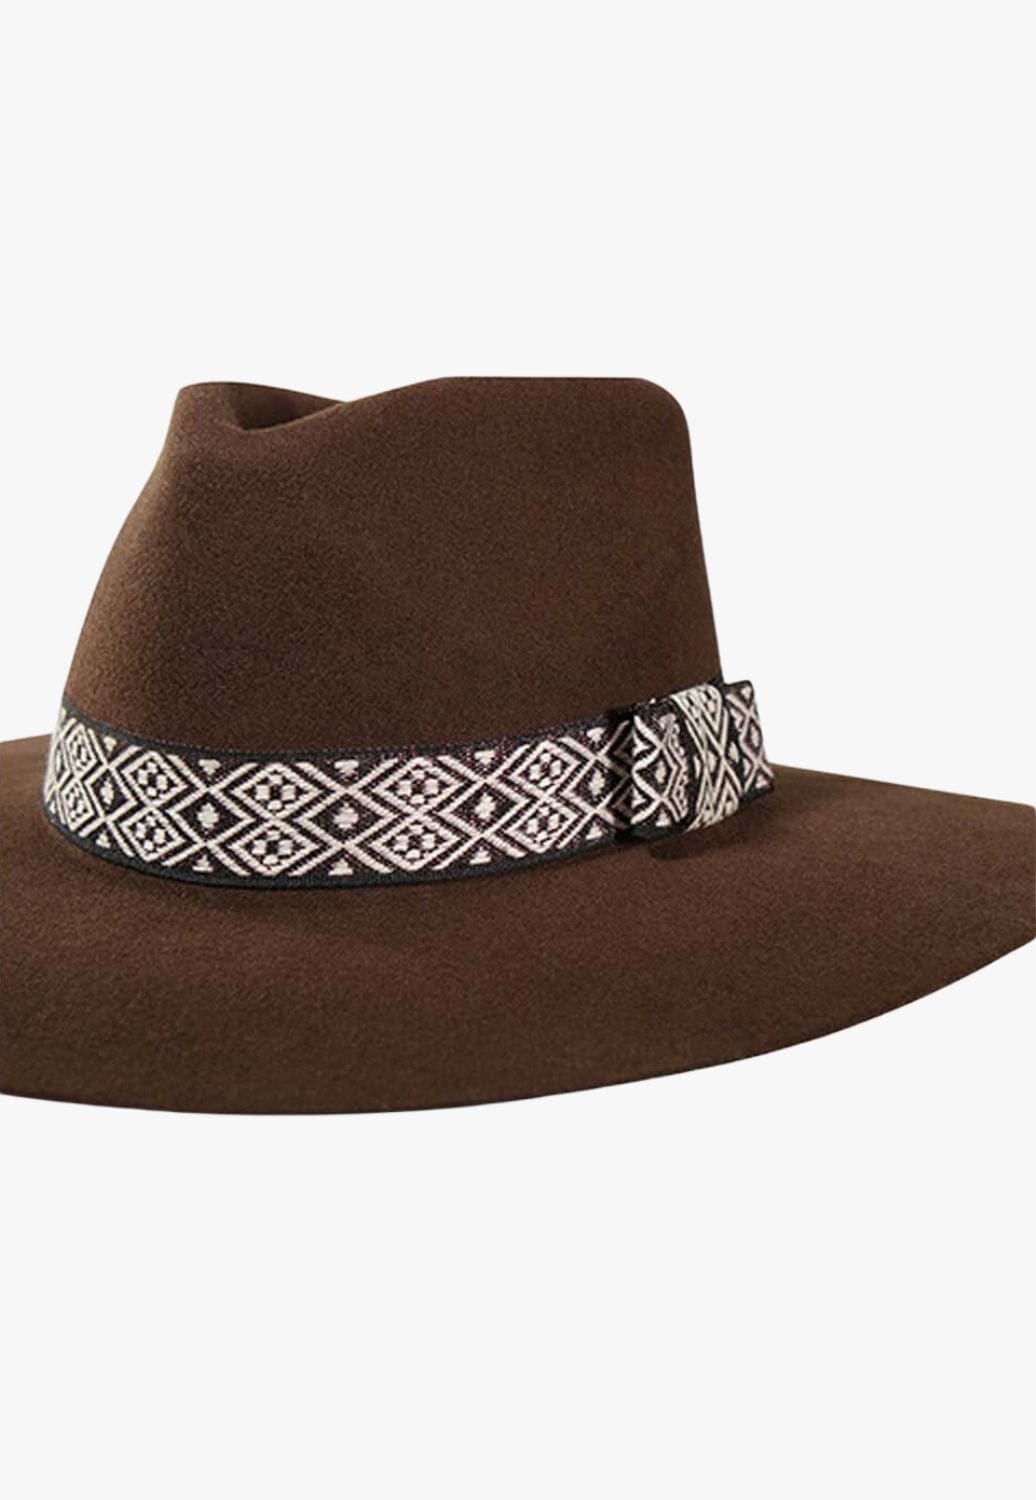 Twister ACCESSORIES-Hat Bands Brown/White Twister Aztec Shimmer Hatband